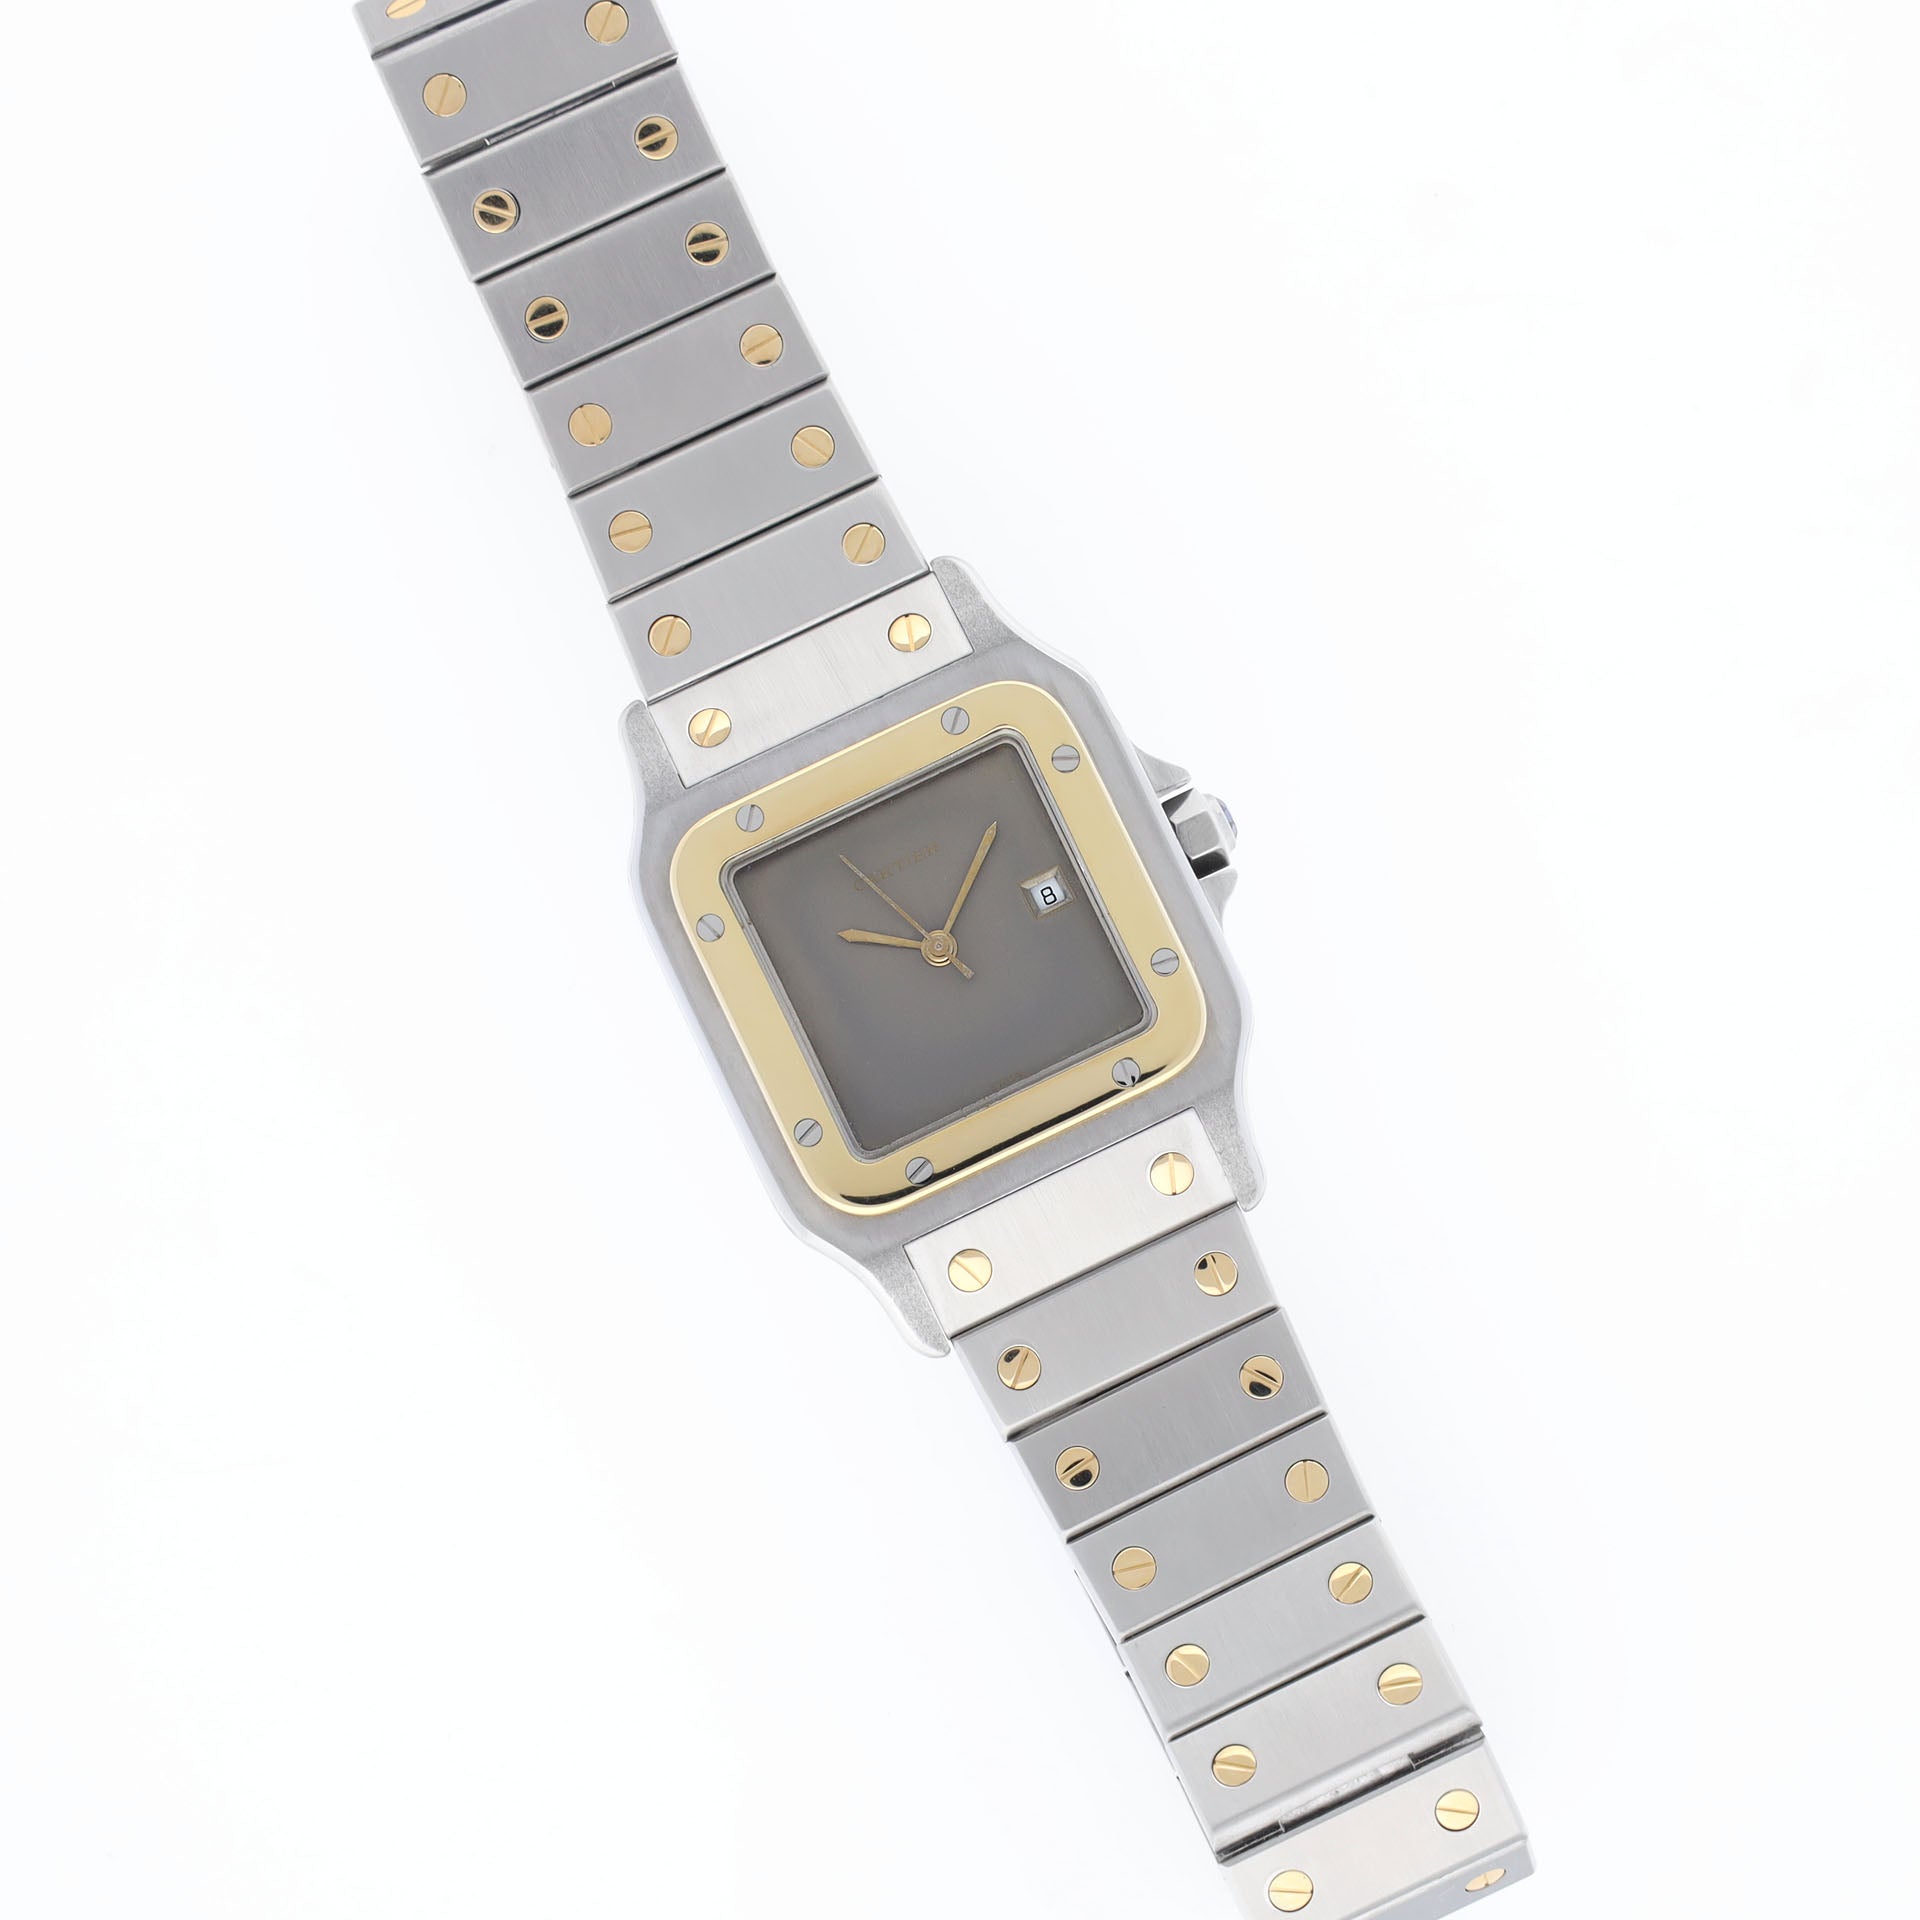 Cartier Santos 2961 Steel and Gold with Slate Grey Dial 